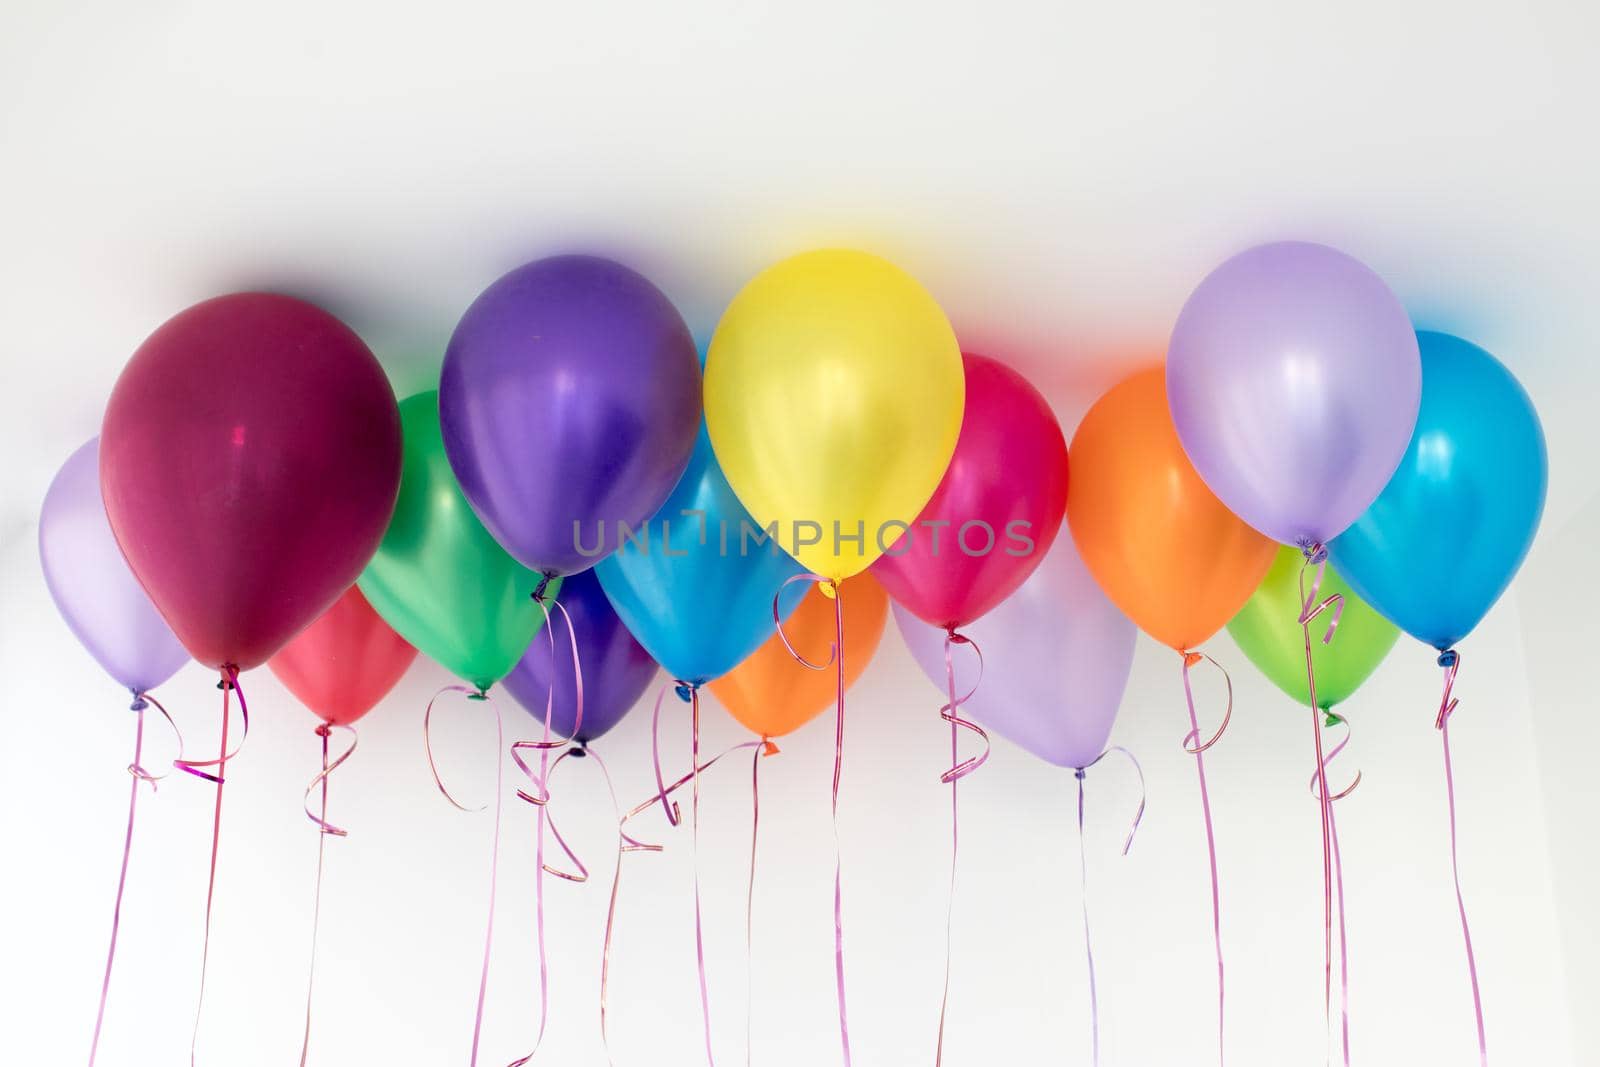 Bright different colored helium balloons hanging under white ceiling.